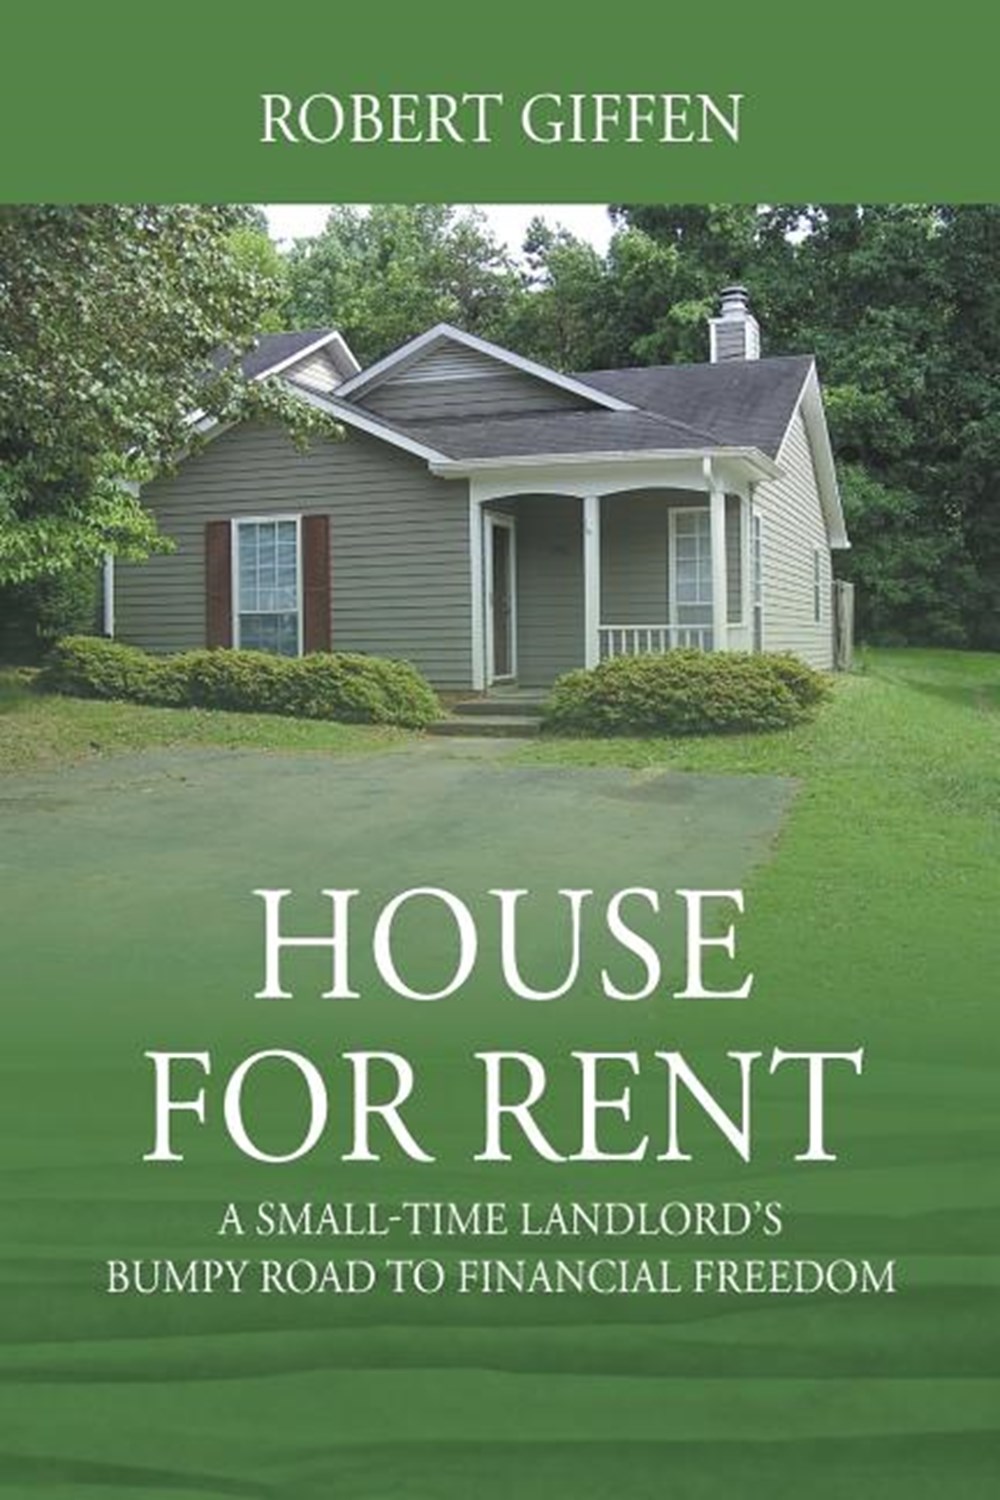 House for Rent A Small-time Landlord's Bumpy Road to Financial Freedom